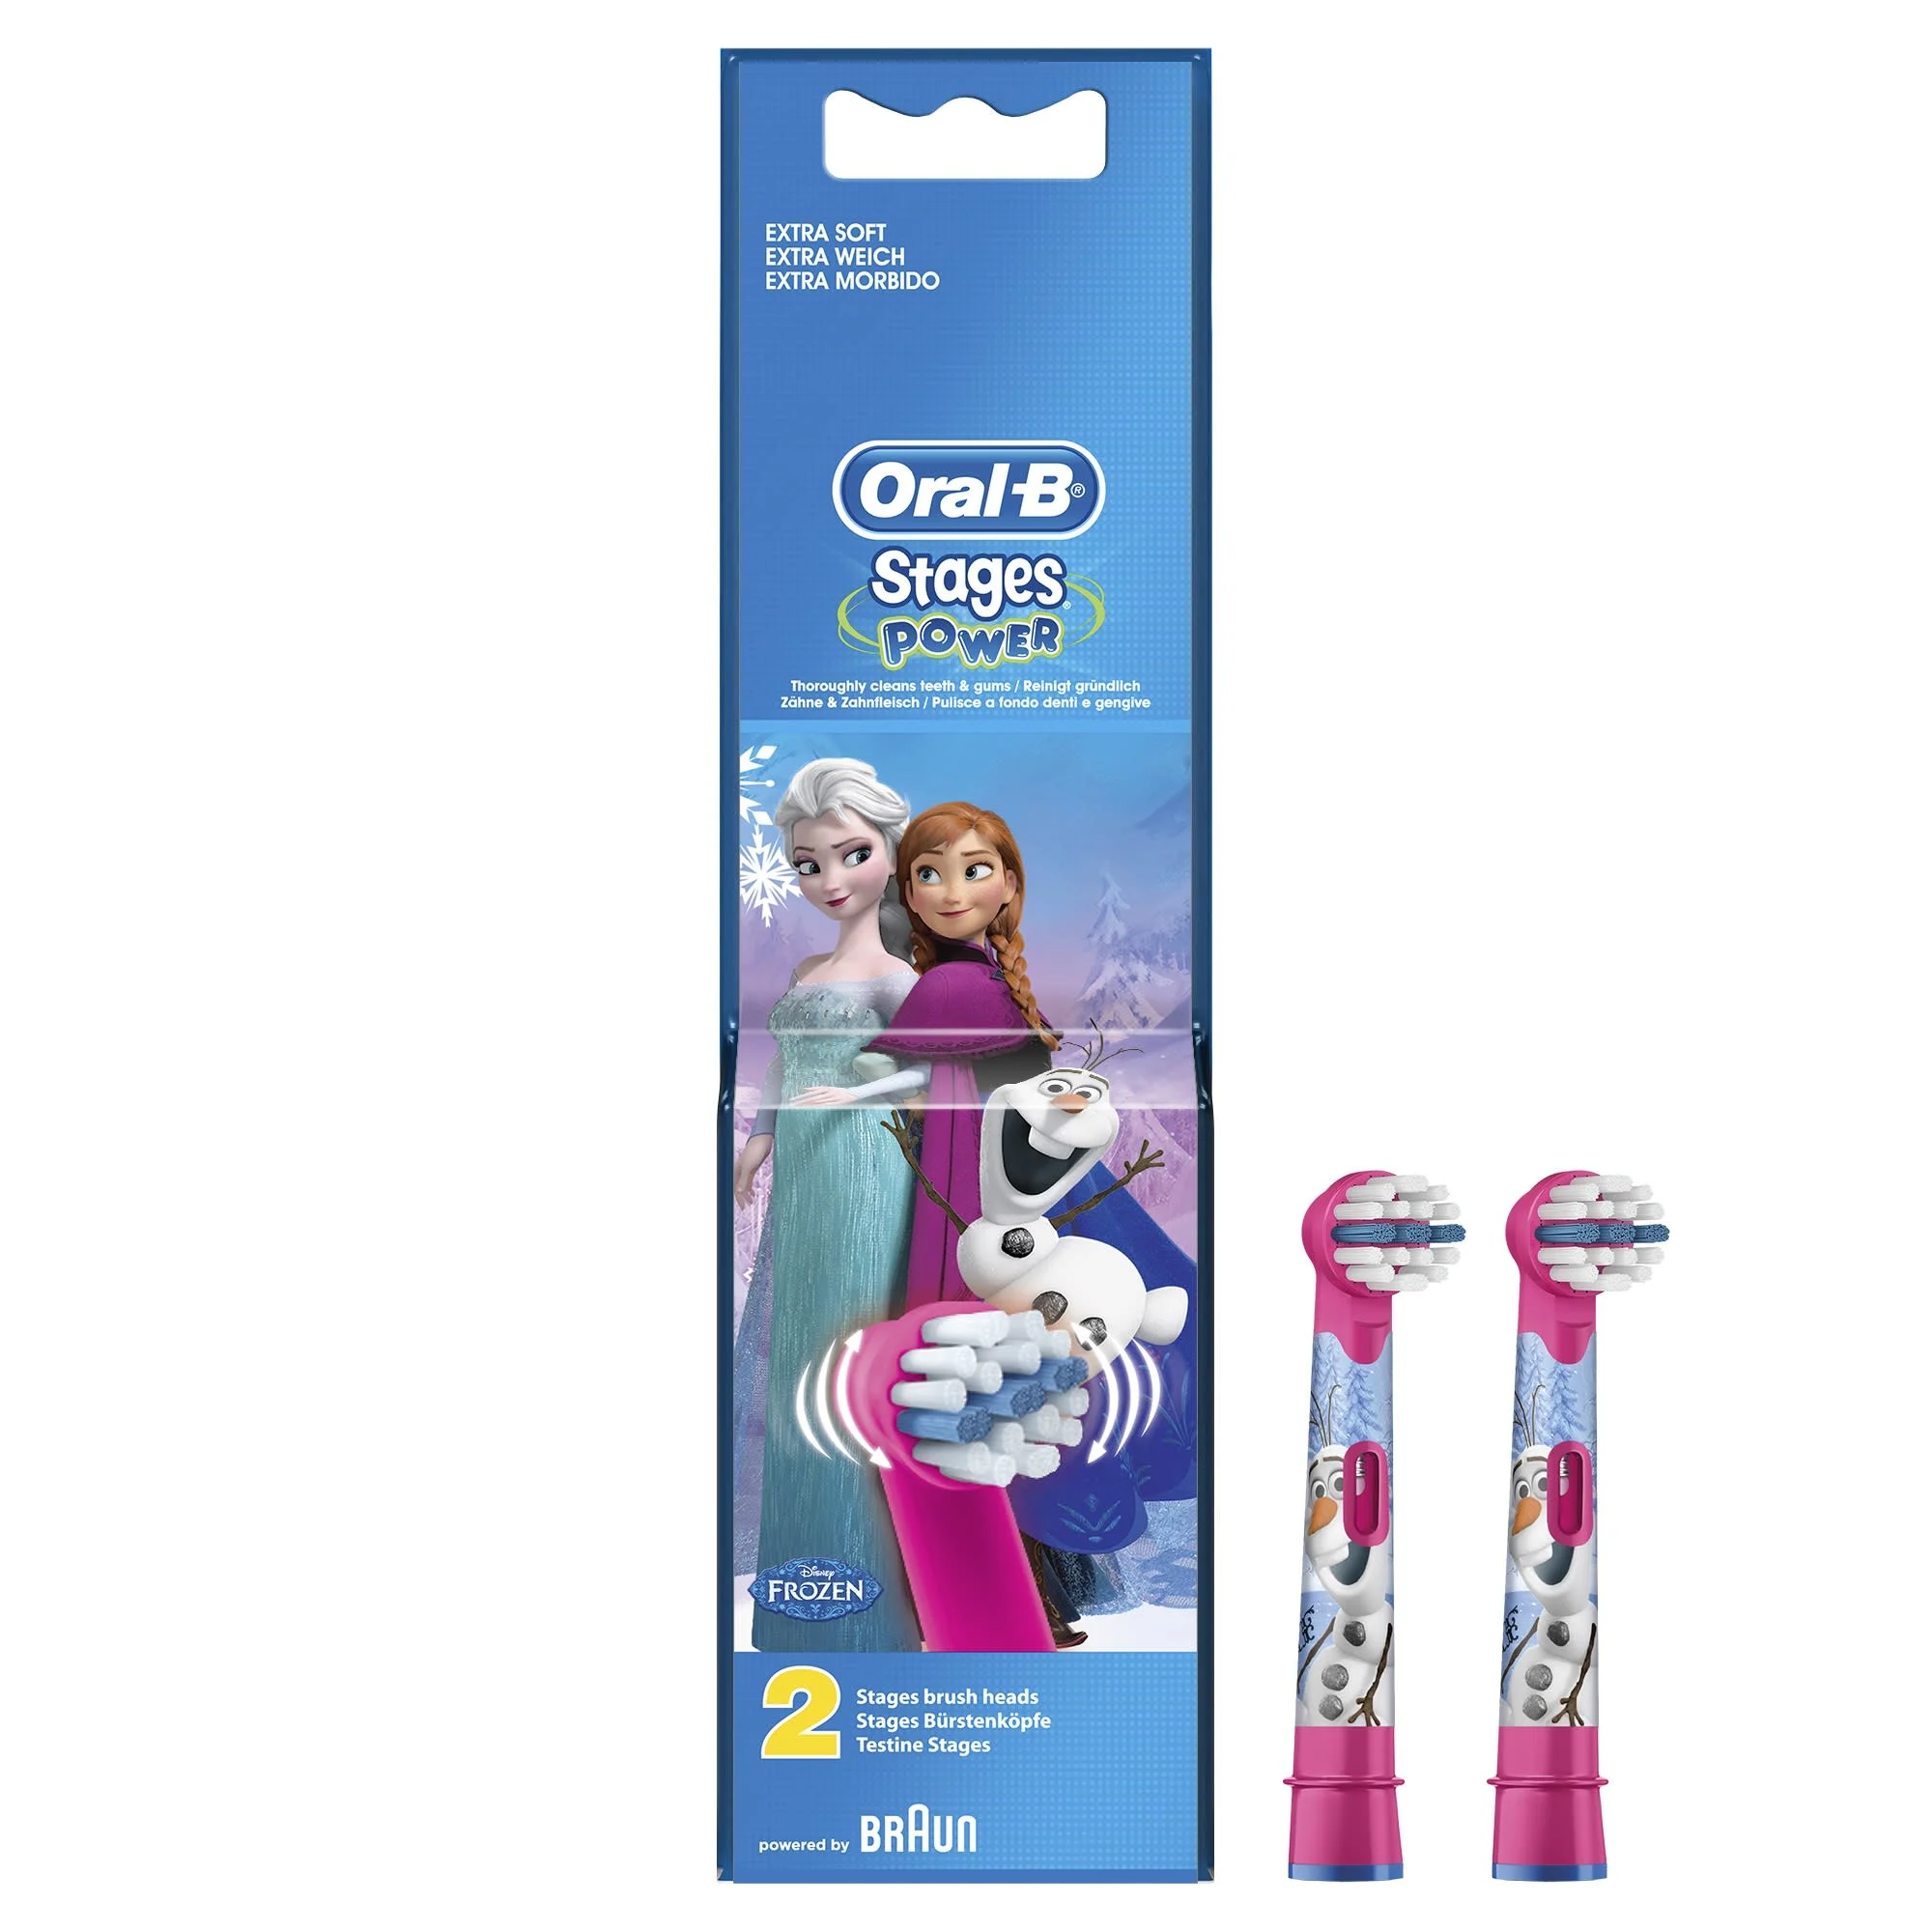 Oral-B Kids Electric Rechargeable Toothbrush Heads Replacement Refills Featuring Disney Frozen Characters - Pack of 2